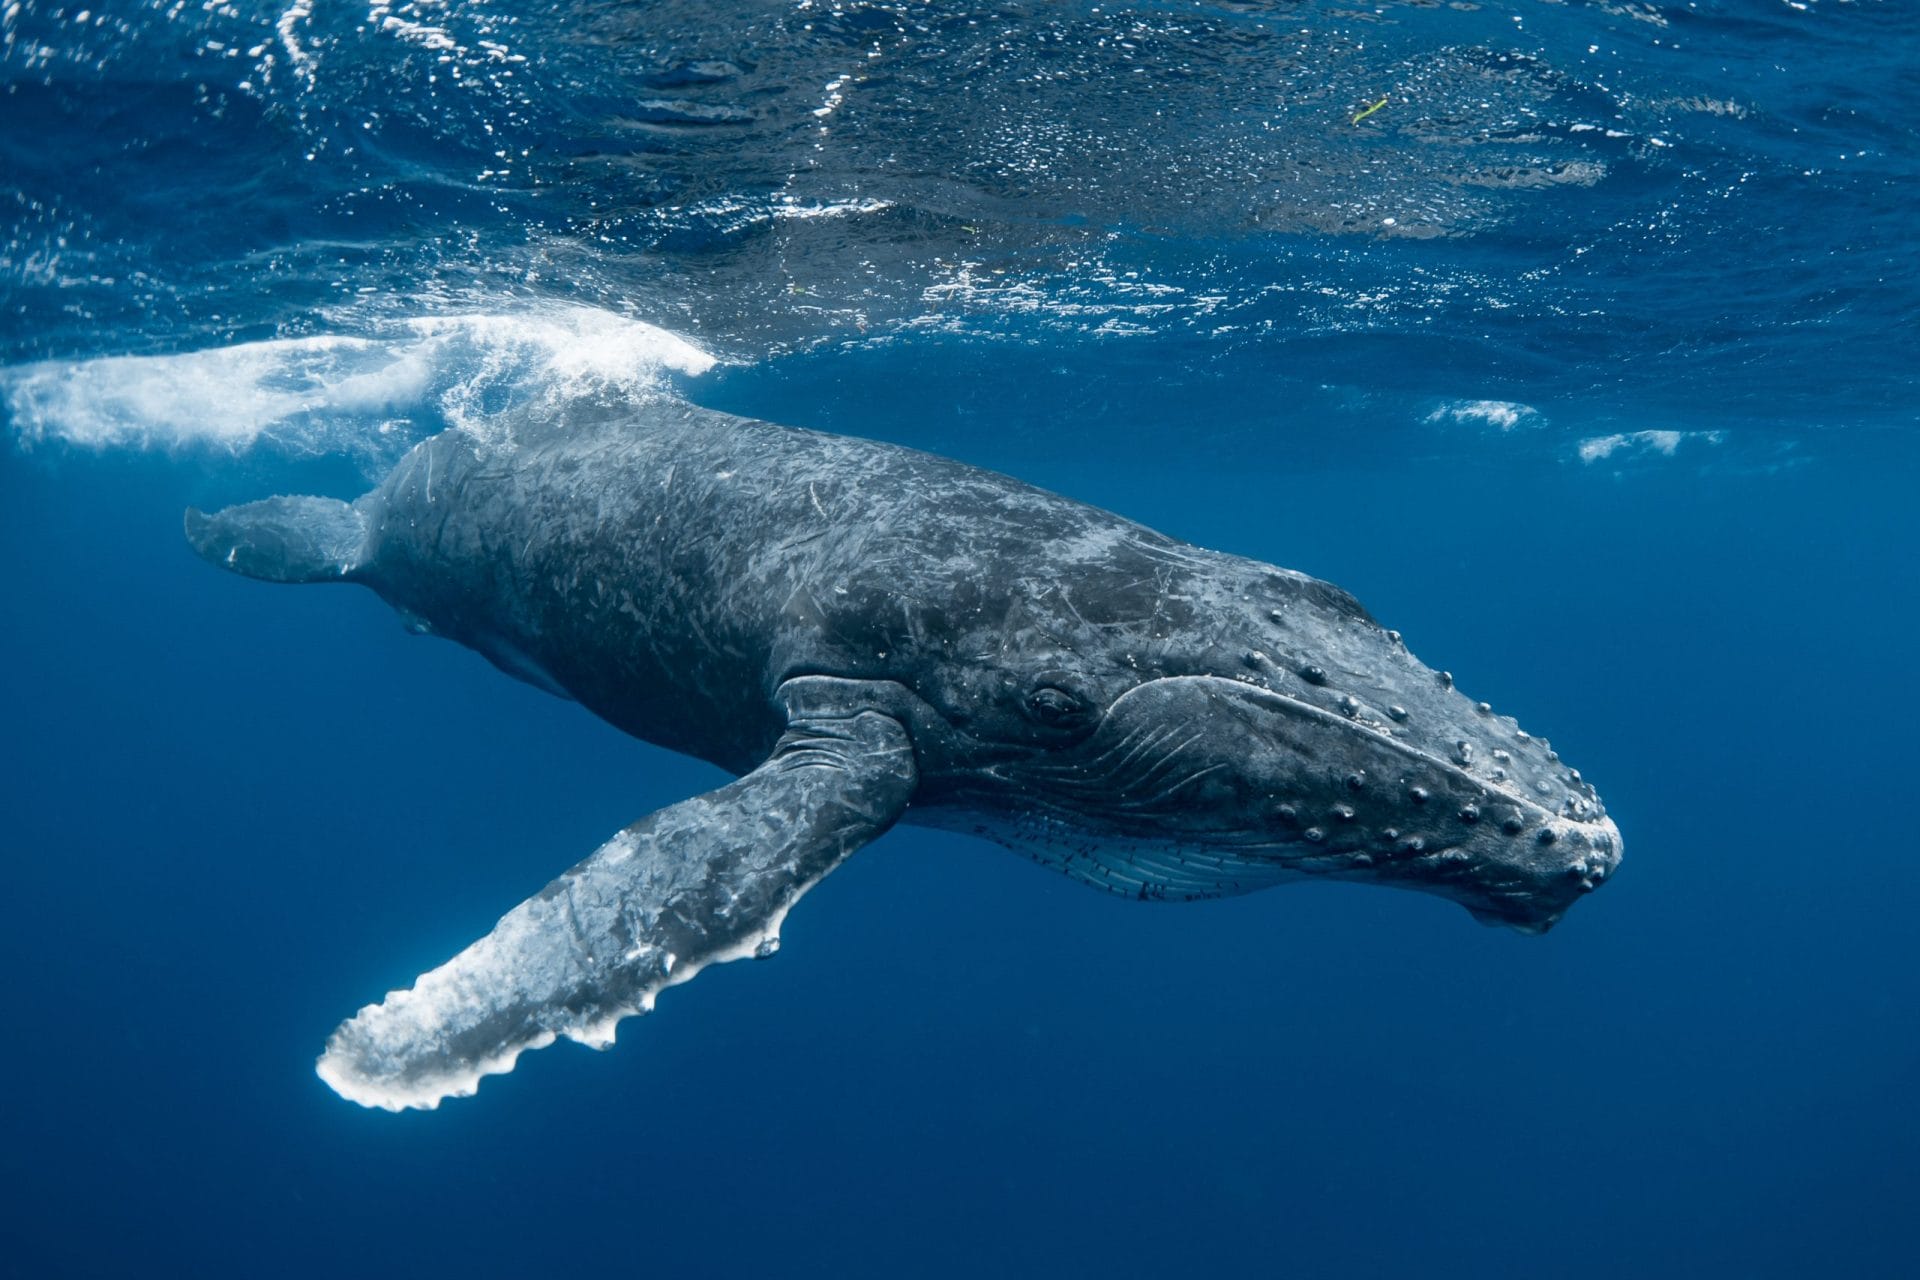 A curious Humpback whale calf in the emerald blue water of Tonga.